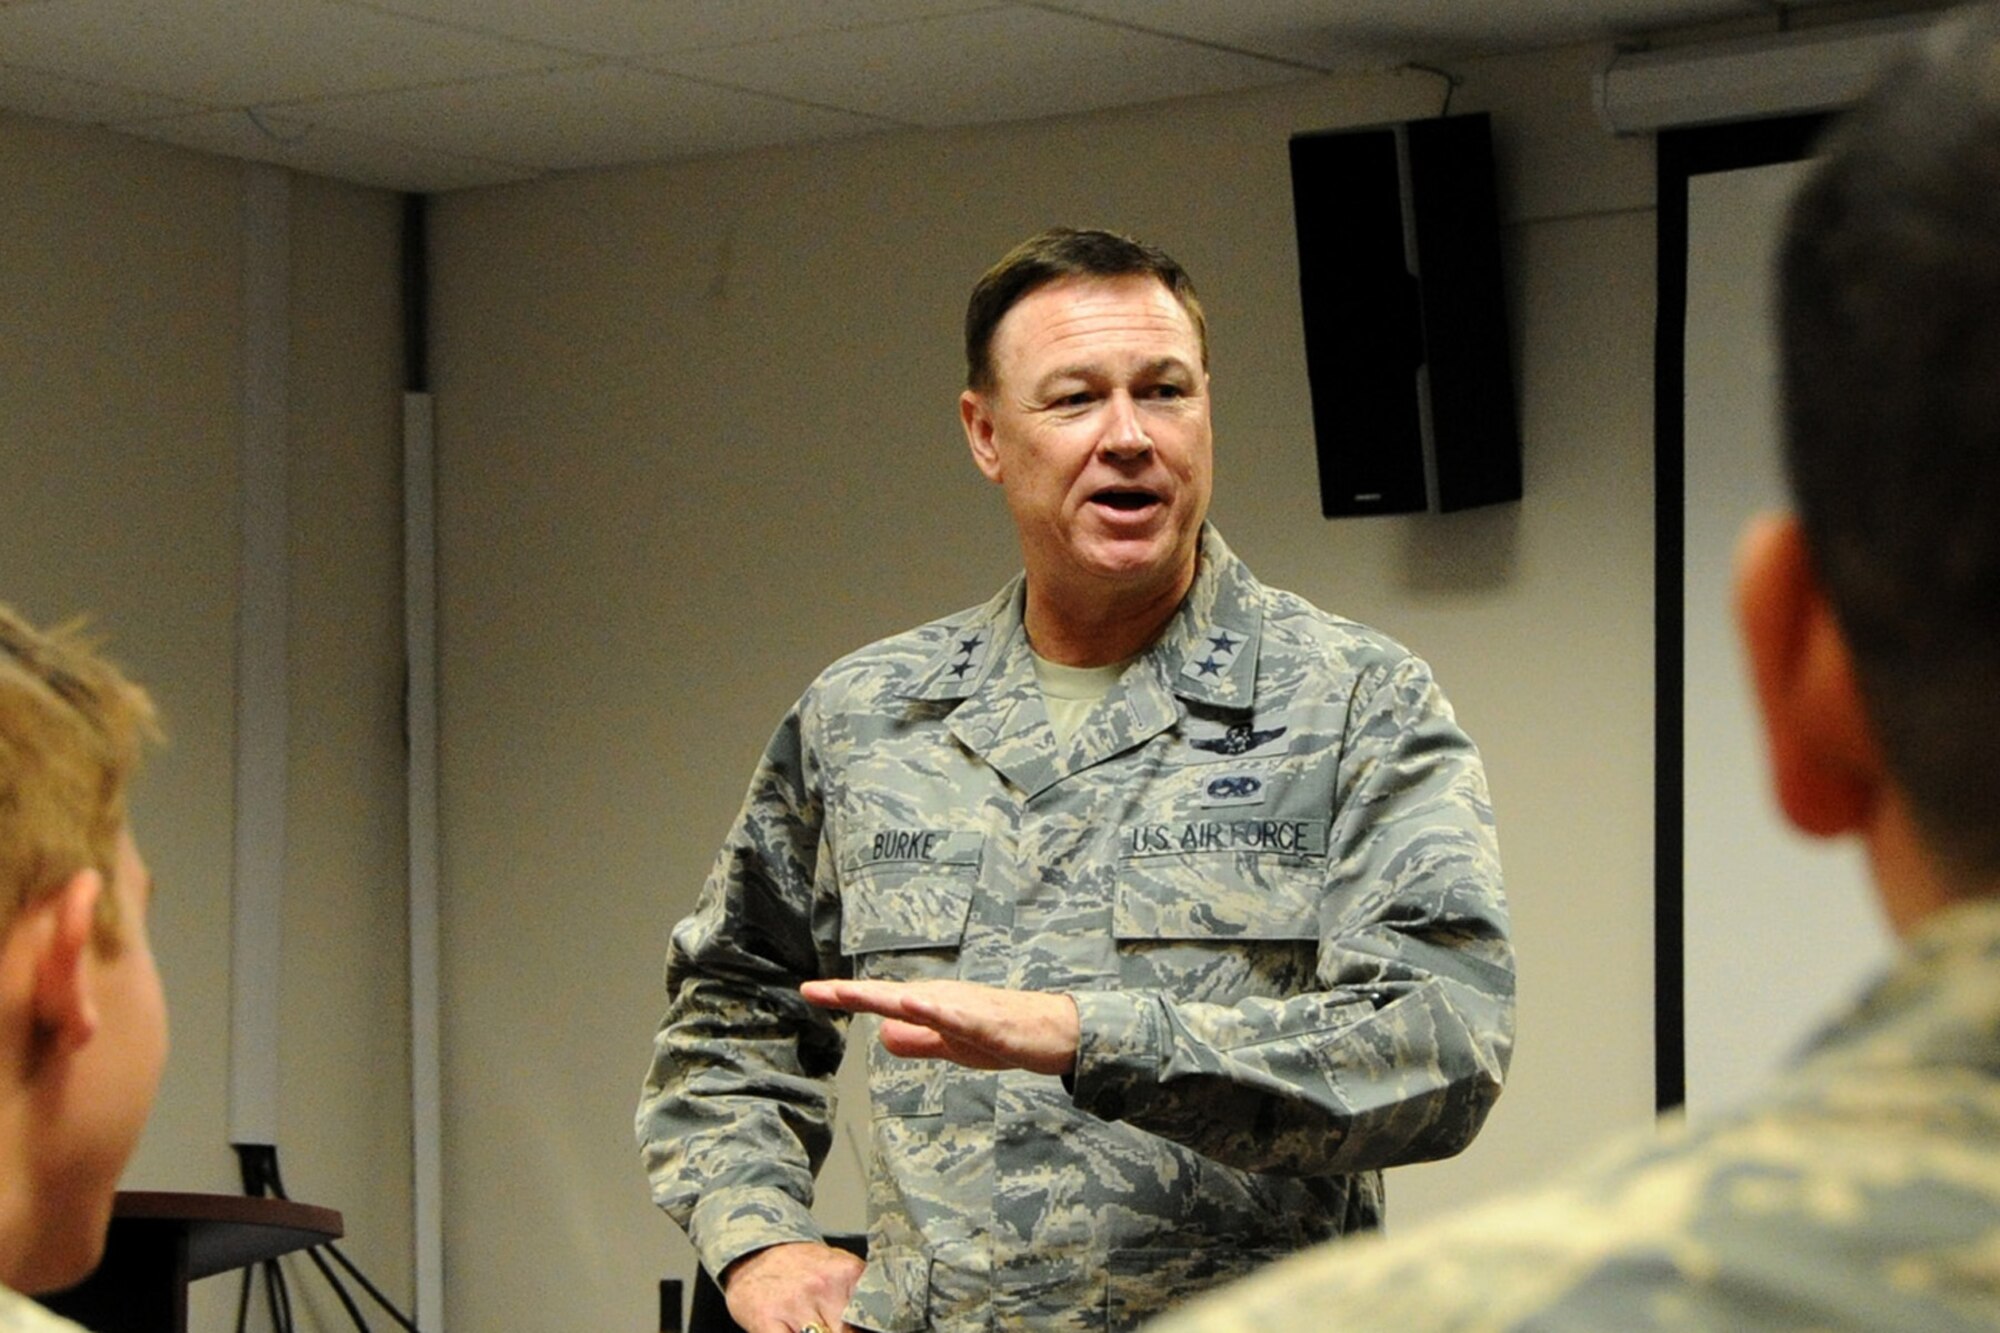 Air Force District of Washington Commander Maj. Gen. Darryl W. Burke speaks to Explosive Ordnance Disposal Airmen from the 11th Civil Engineer Squadron on Joint Base Andrews, Md., Oct. 23, 2015. Burke communicates his appreciation for the EOD Airmen’s sacrifice for the mission and recognized excellence within their career field. (U.S. Air Force photo/Staff Sgt. Matt Davis)